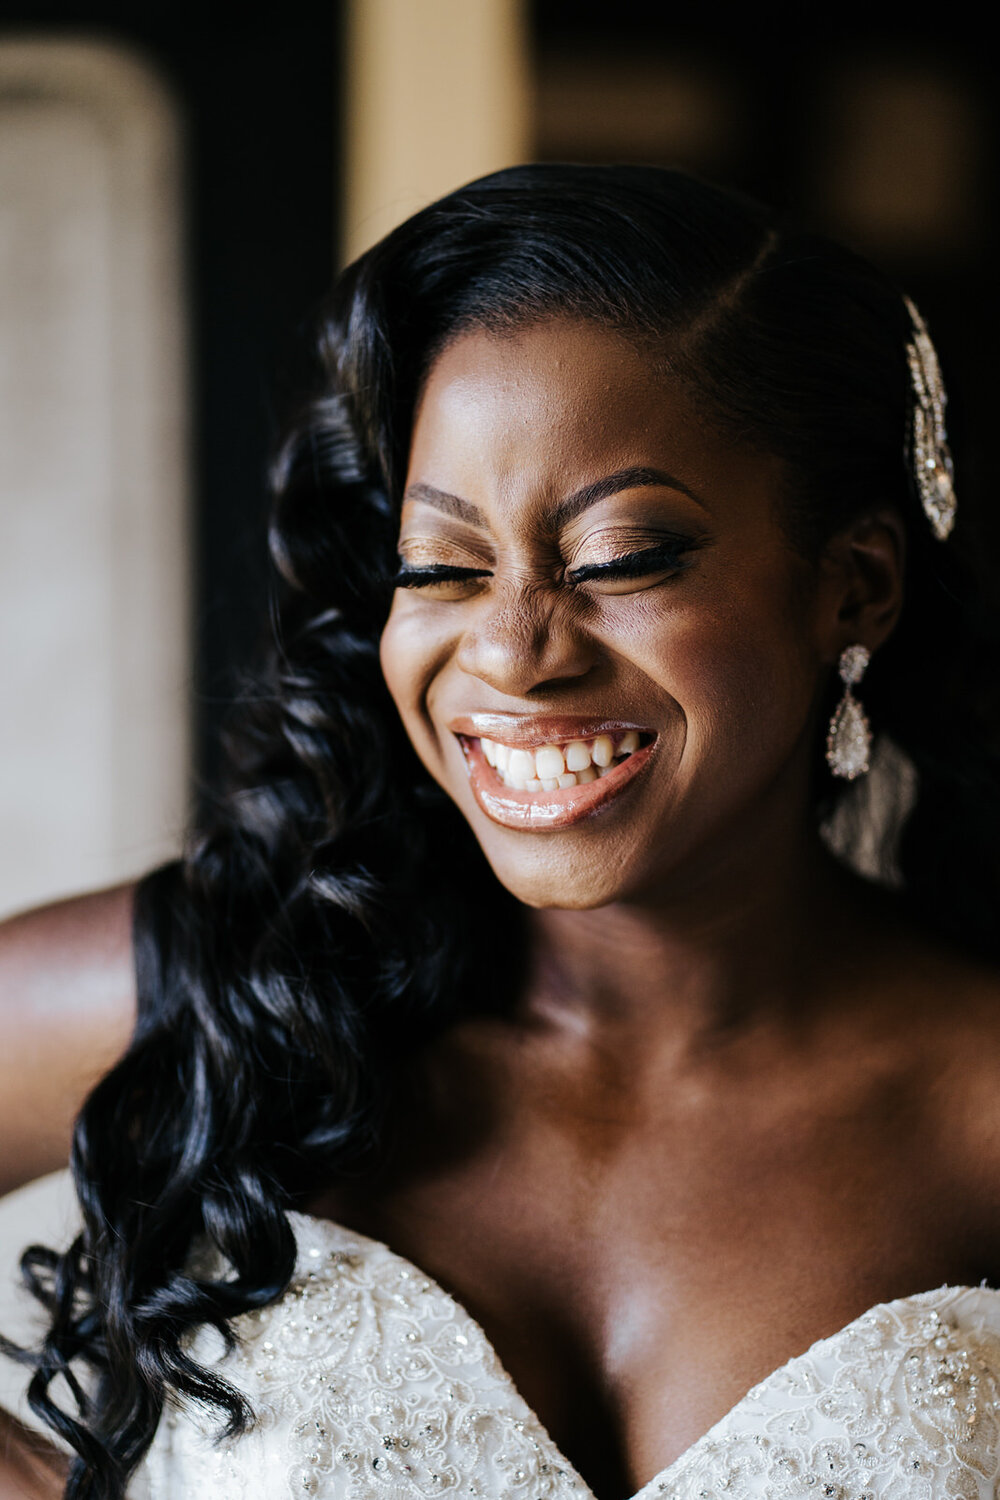 Bride smiles to herself in candid photograph of her getting ready